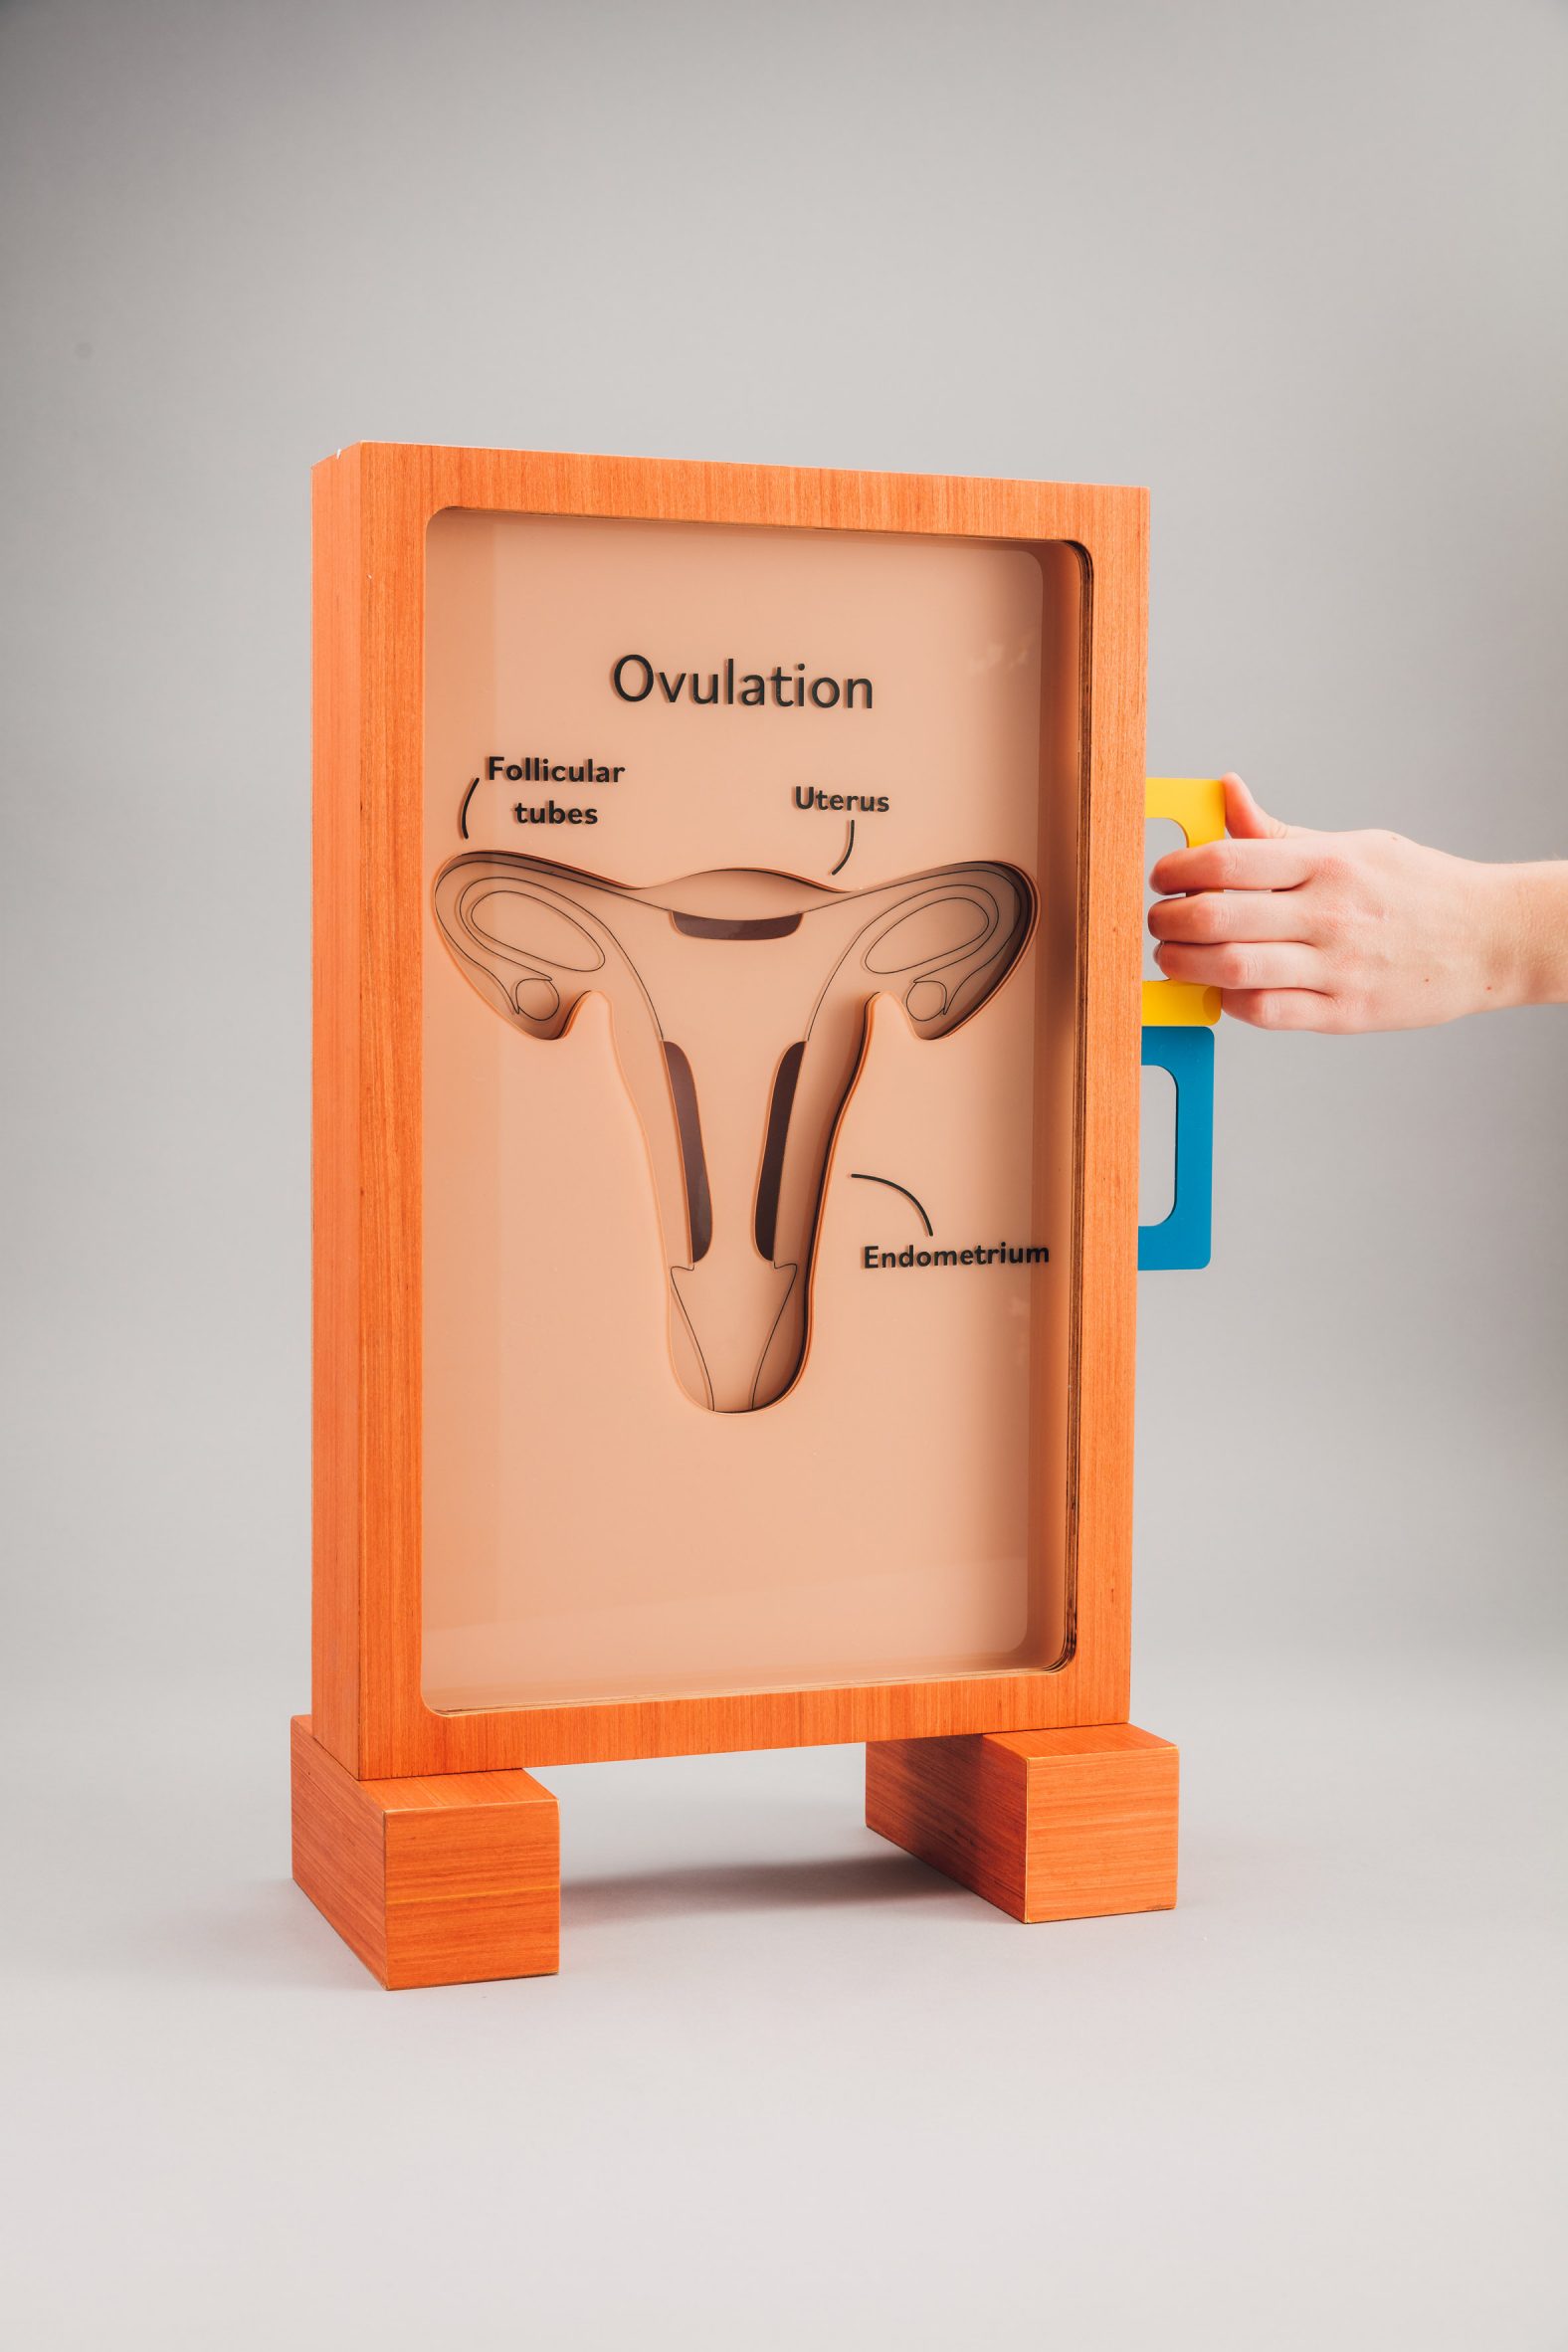 Photo of an educational tool for menstruation